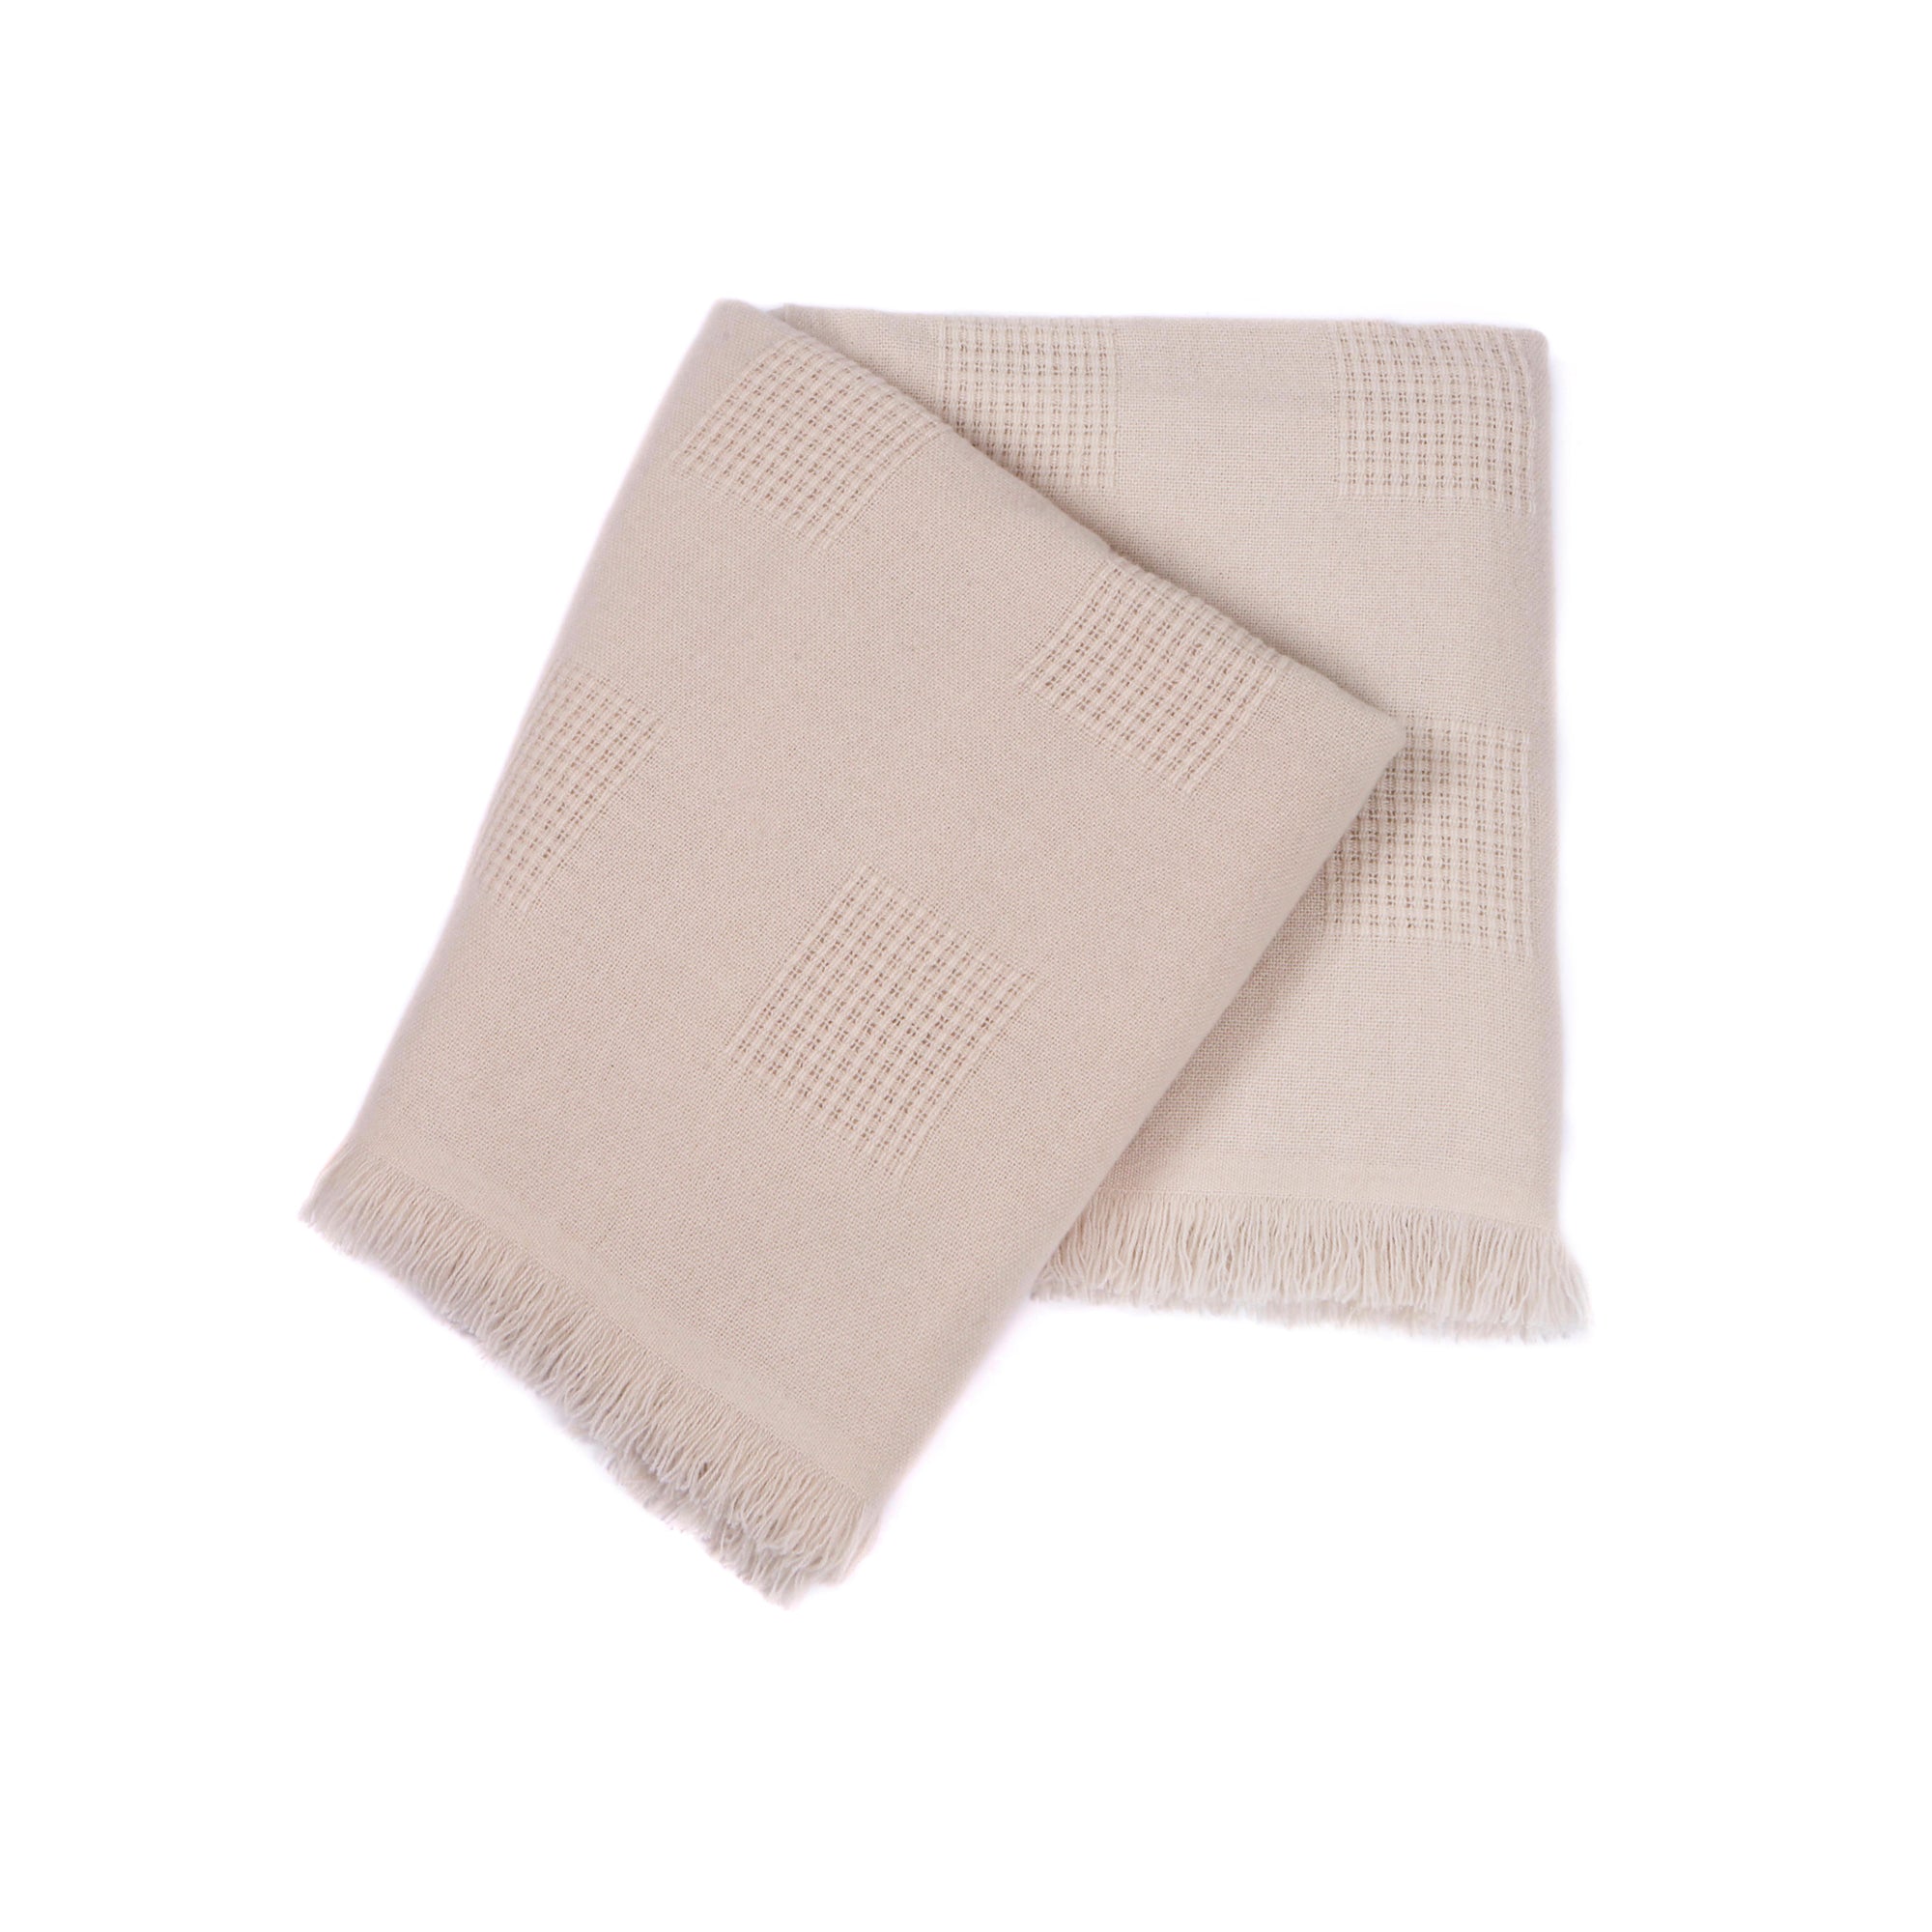 Farnese Light Powder 100% Cashmere Single Plaid with short fringes - Main view